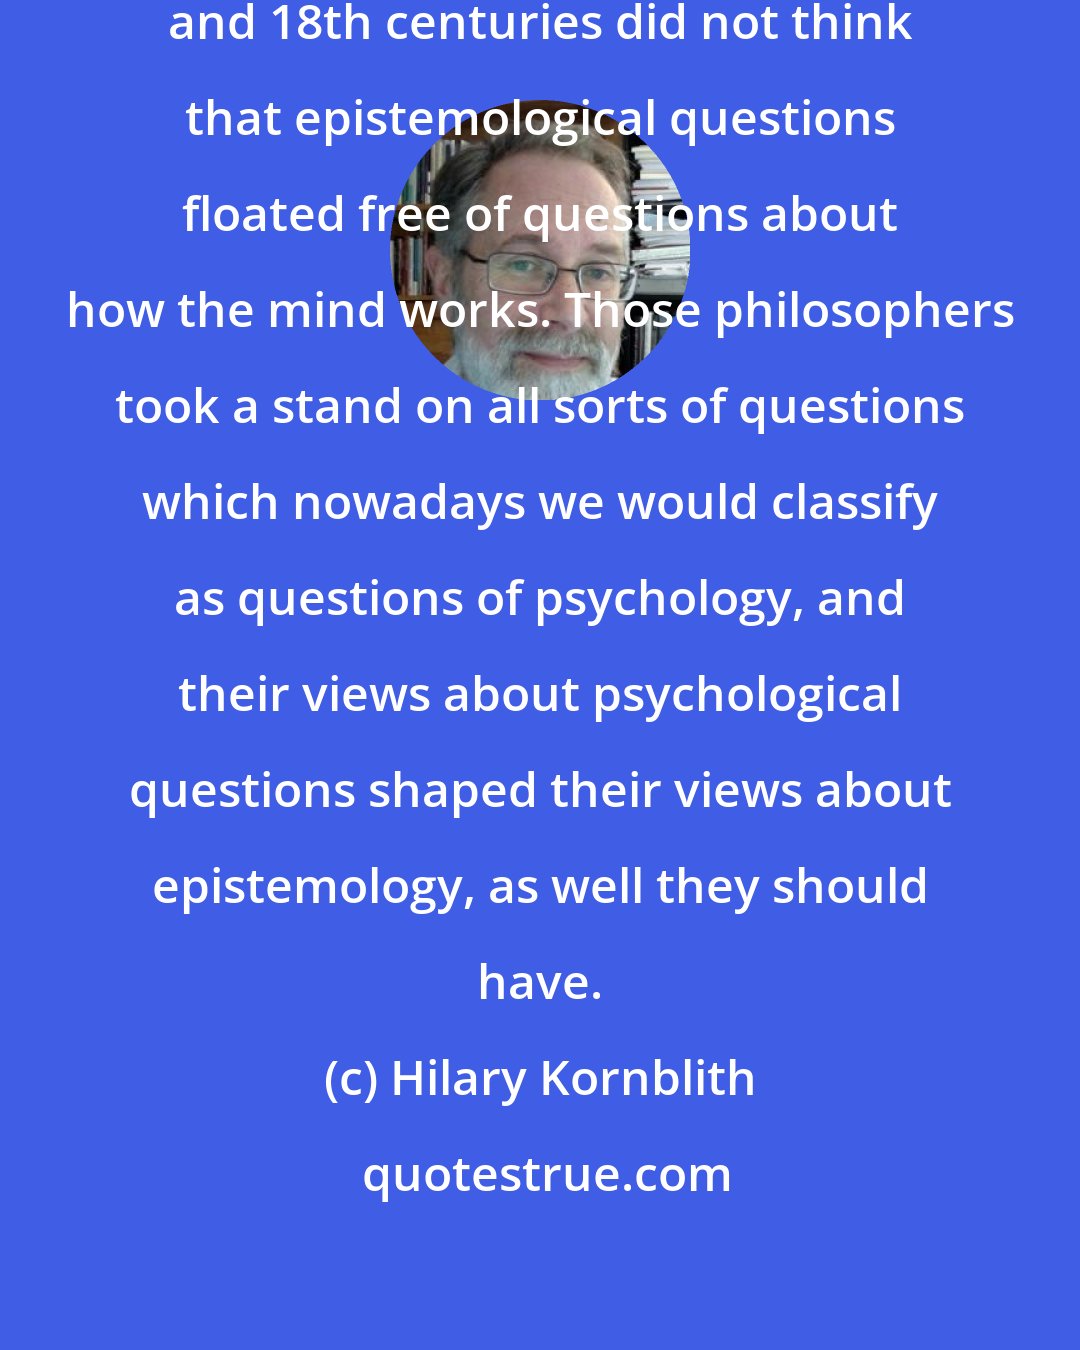 Hilary Kornblith: The great philosophers of the 17th and 18th centuries did not think that epistemological questions floated free of questions about how the mind works. Those philosophers took a stand on all sorts of questions which nowadays we would classify as questions of psychology, and their views about psychological questions shaped their views about epistemology, as well they should have.